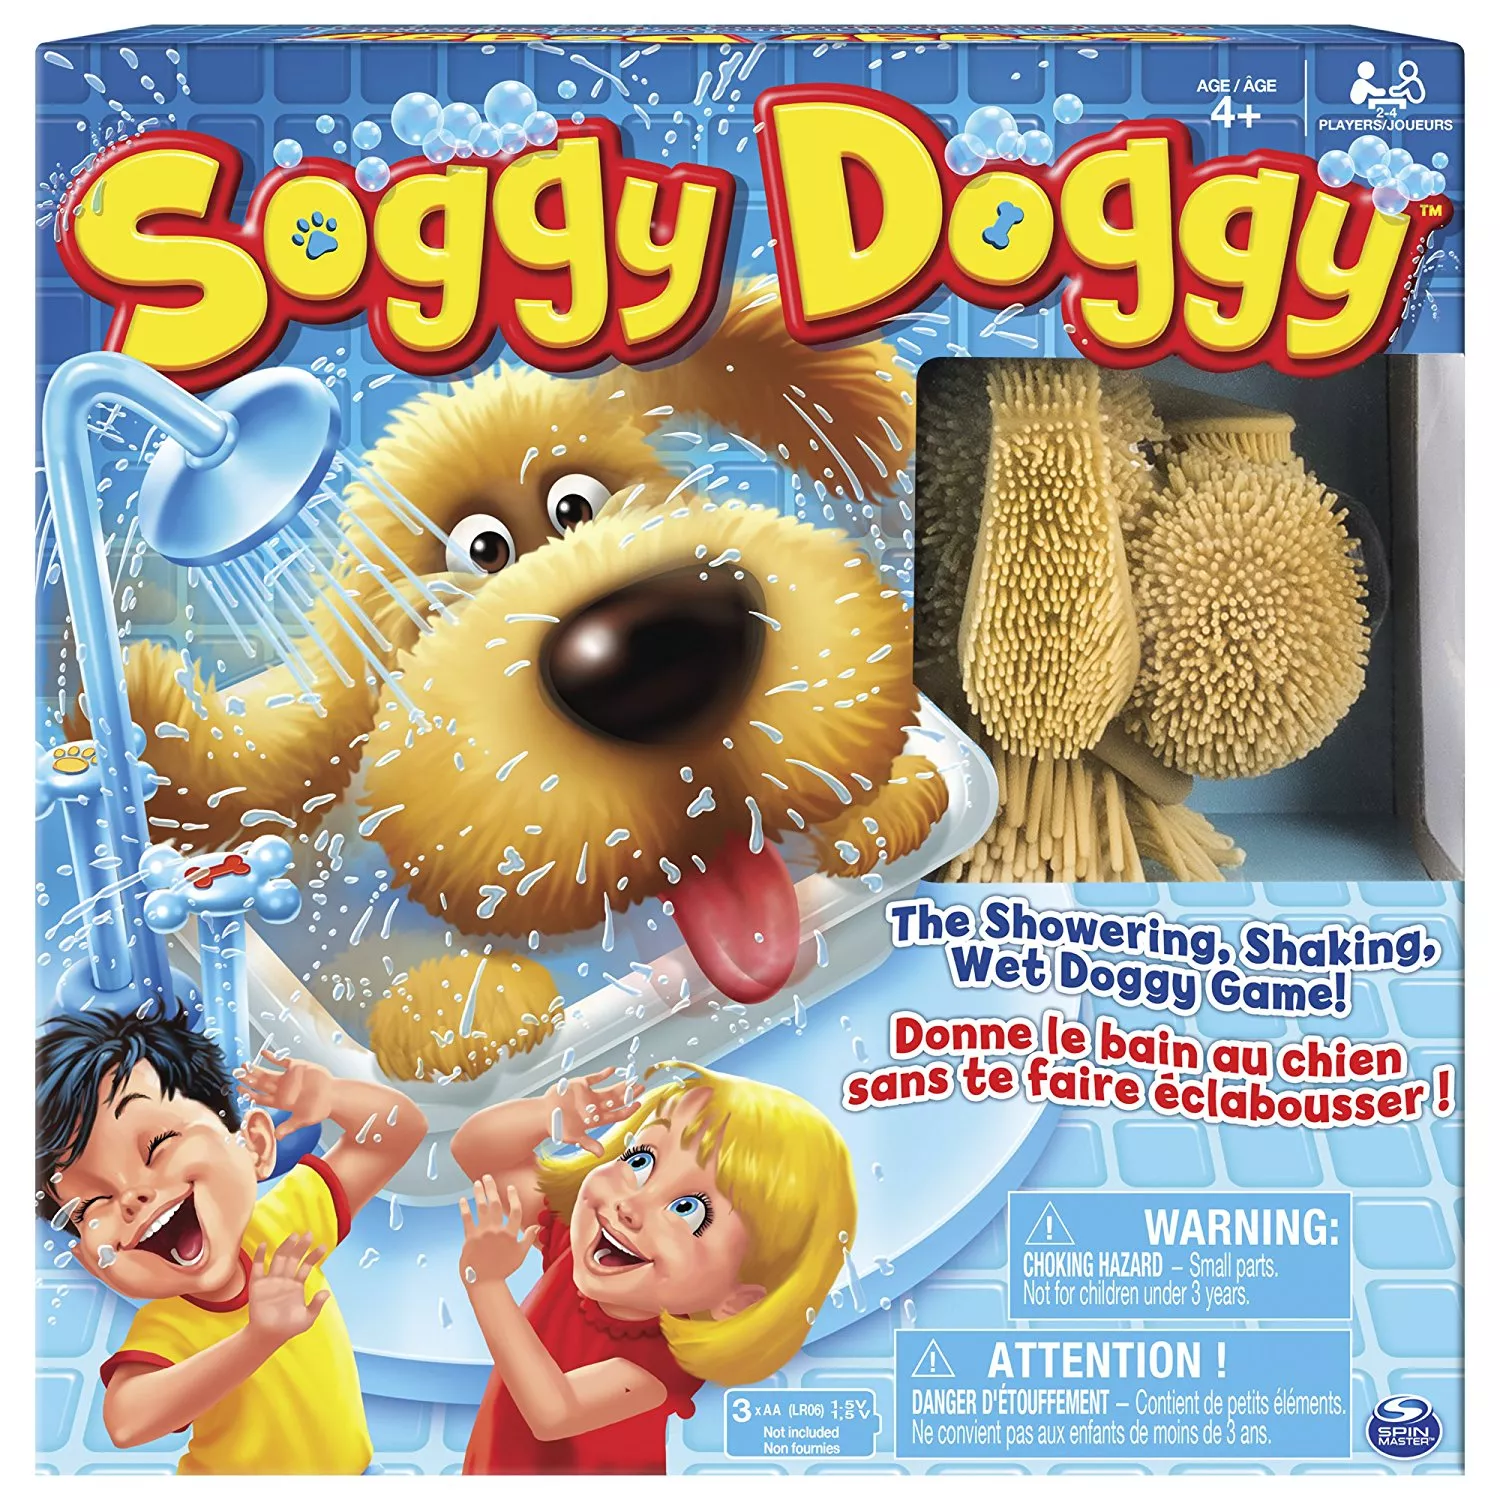 Buy Soggy Doggy Family Board Game for Kids 2017 - Price & Where to Buy On Sale 2018